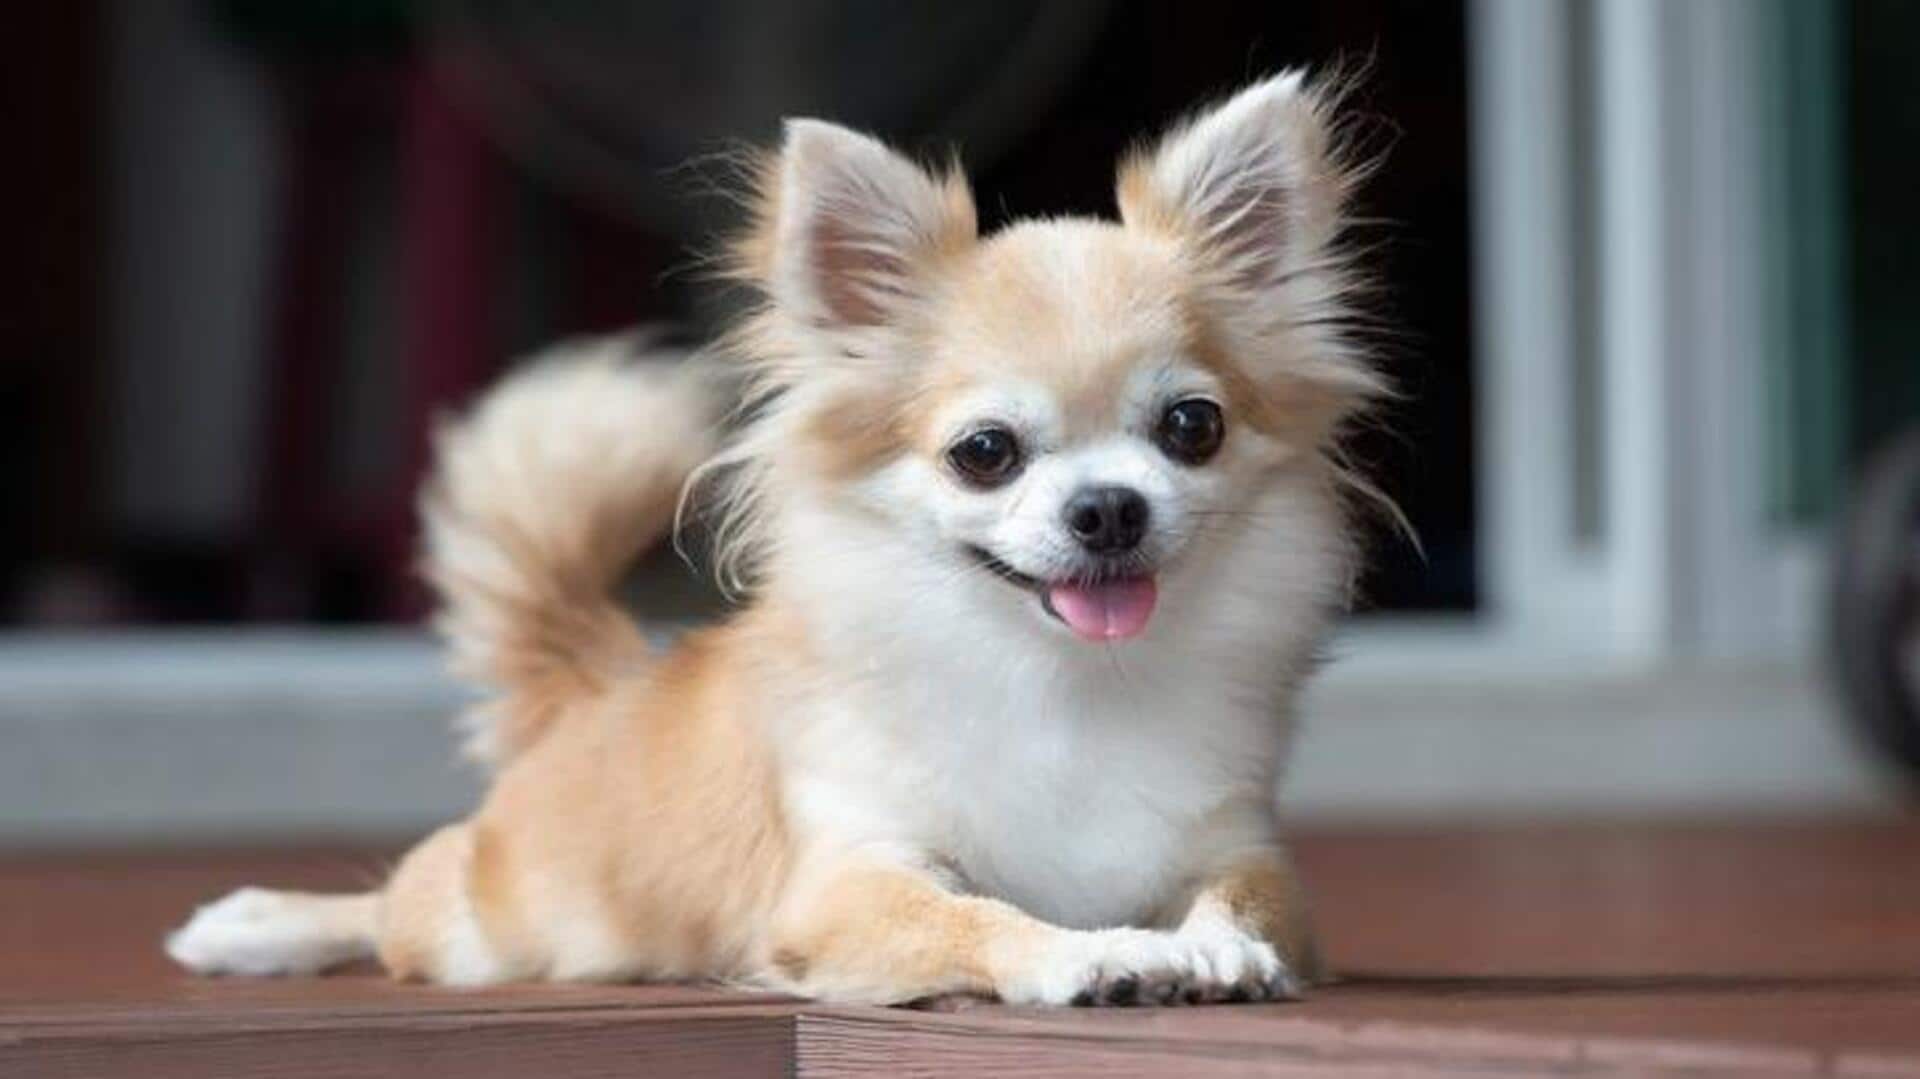 How to train a Chihuahua: Follow these tips